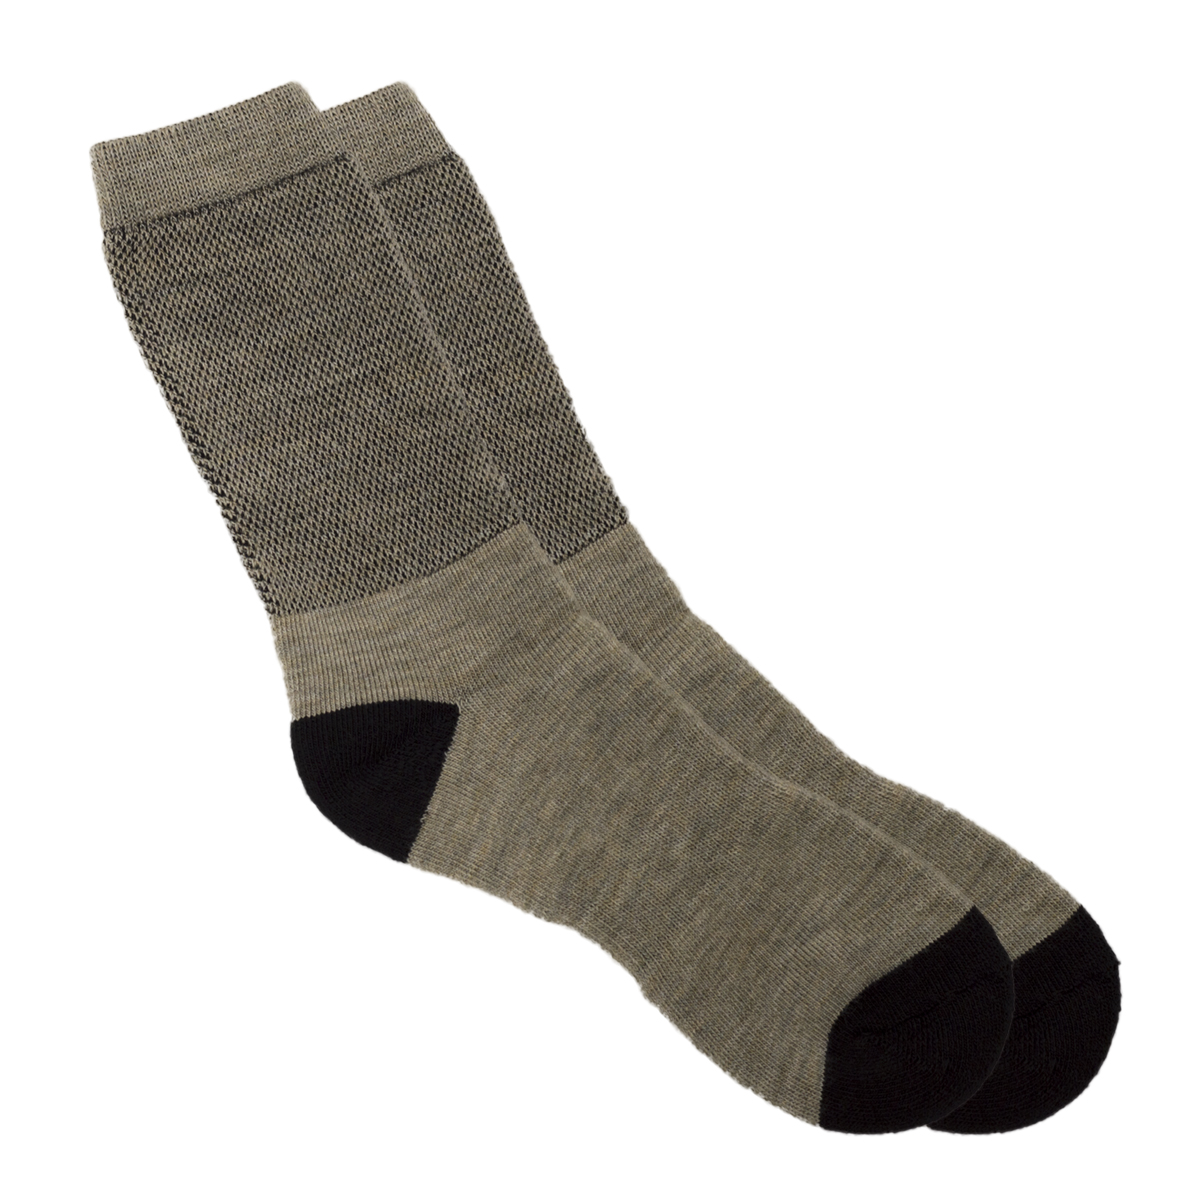 Warm Arch Support with Light Top - Black&Tan | Sock-Hound.com